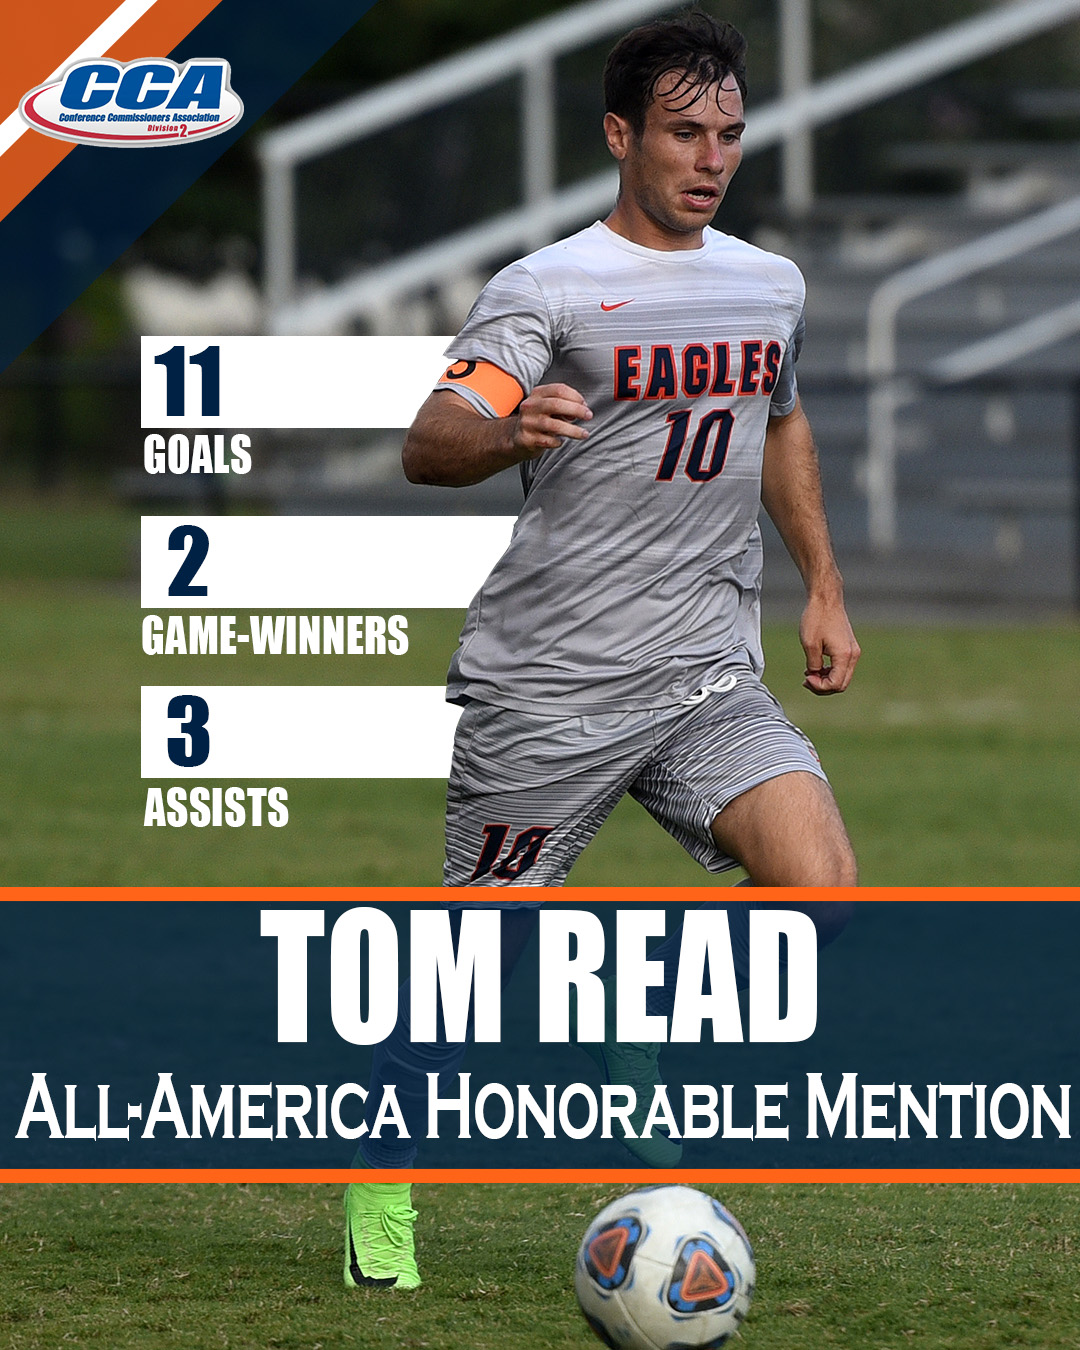 Read picks up D2CCA All-America Honorable Mention